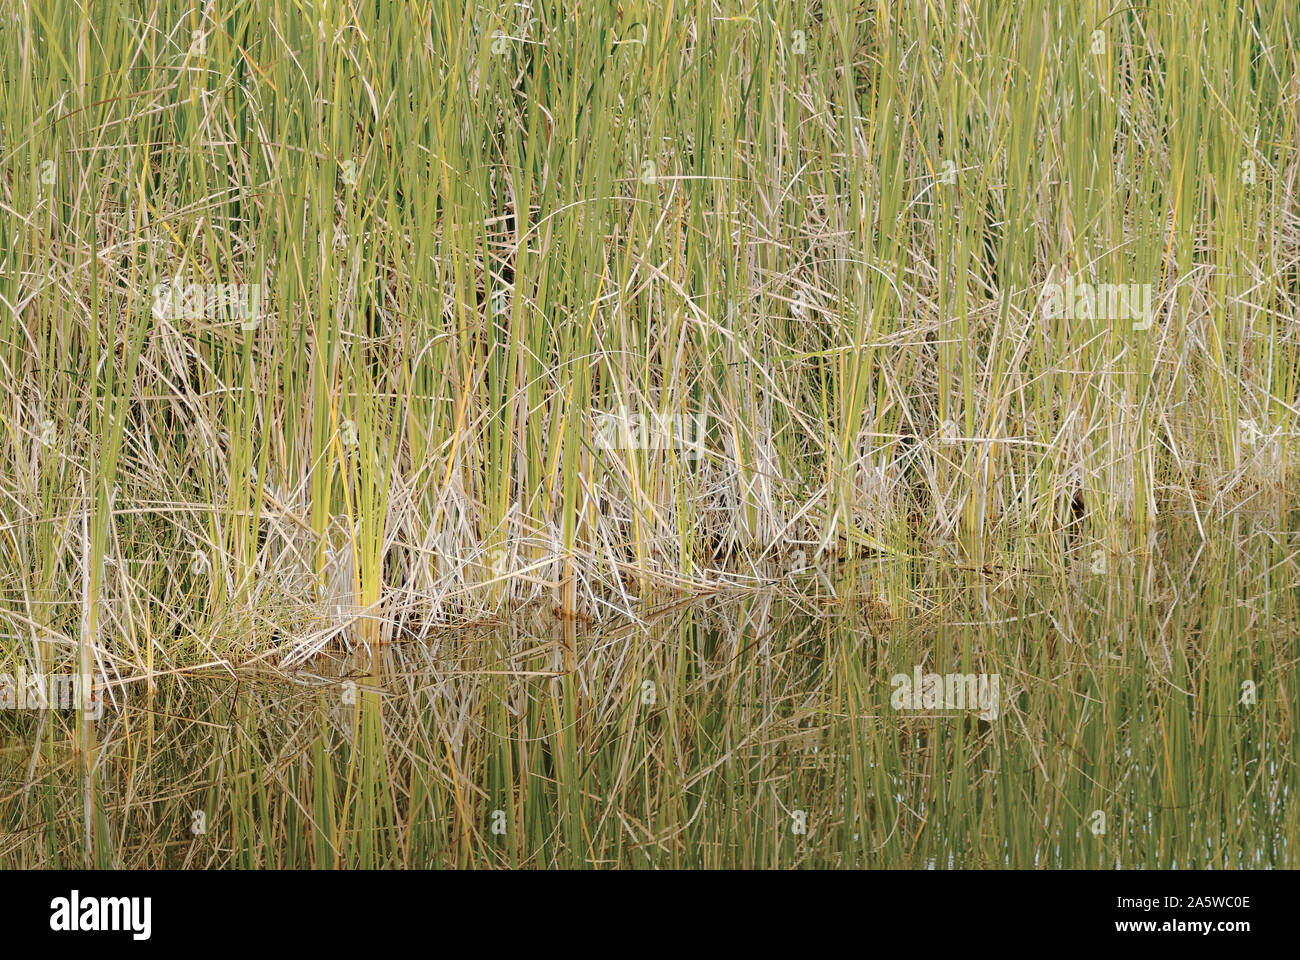 Grass growing on water, detail Stock Photo